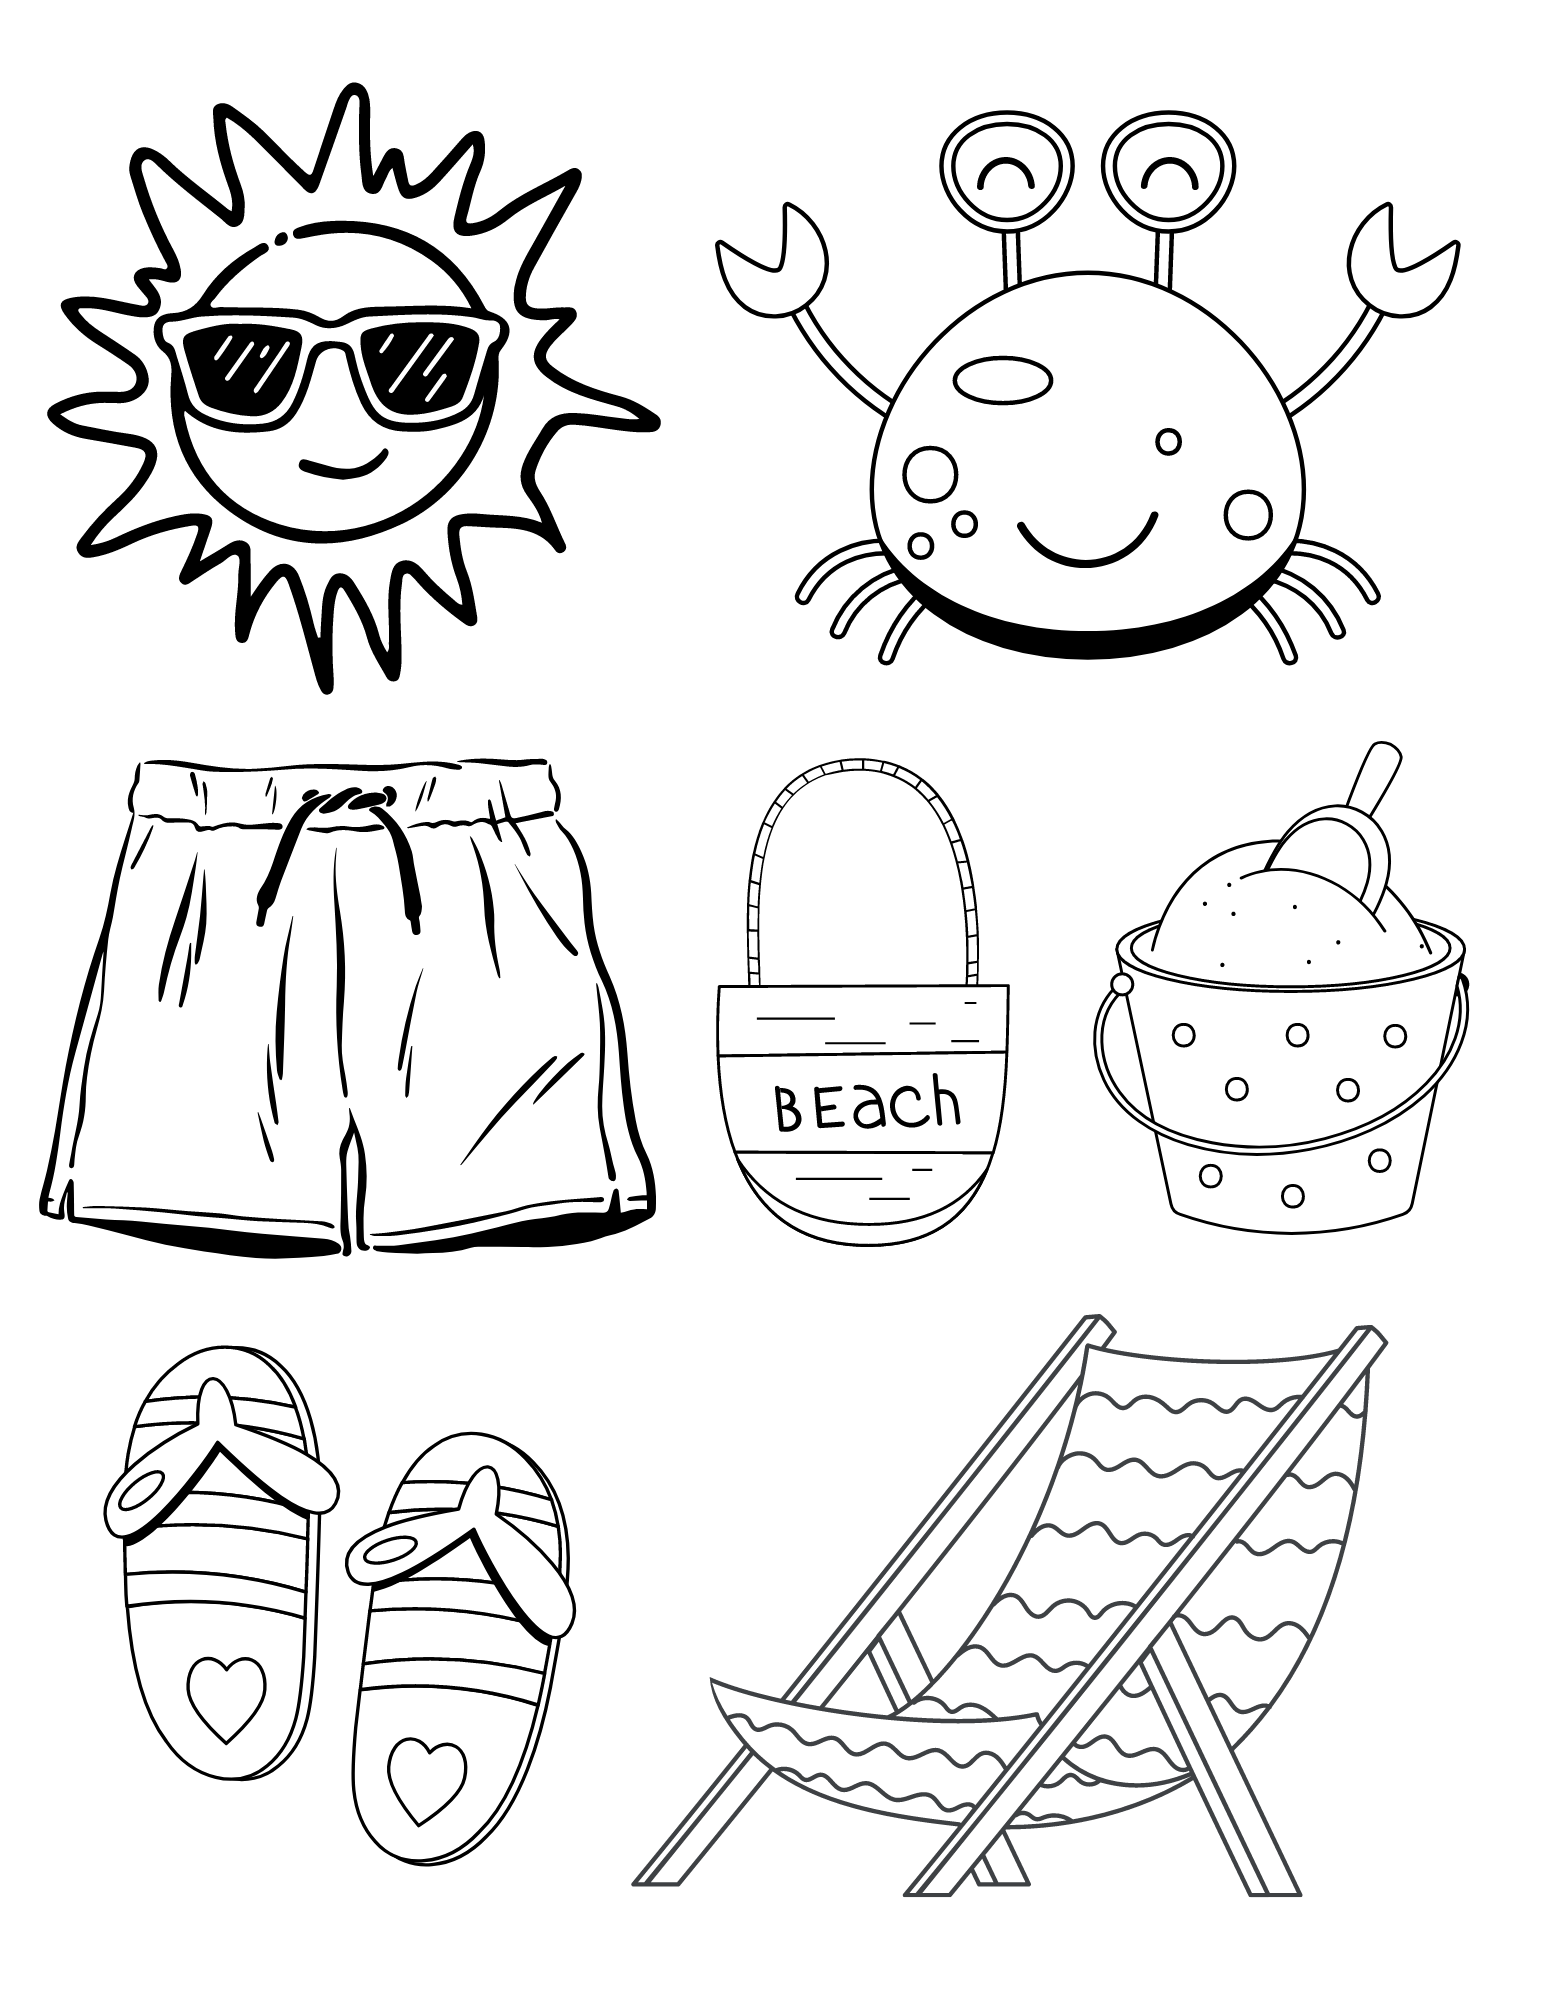 Celebrate warm weather with these summer coloring pages for kids and adults